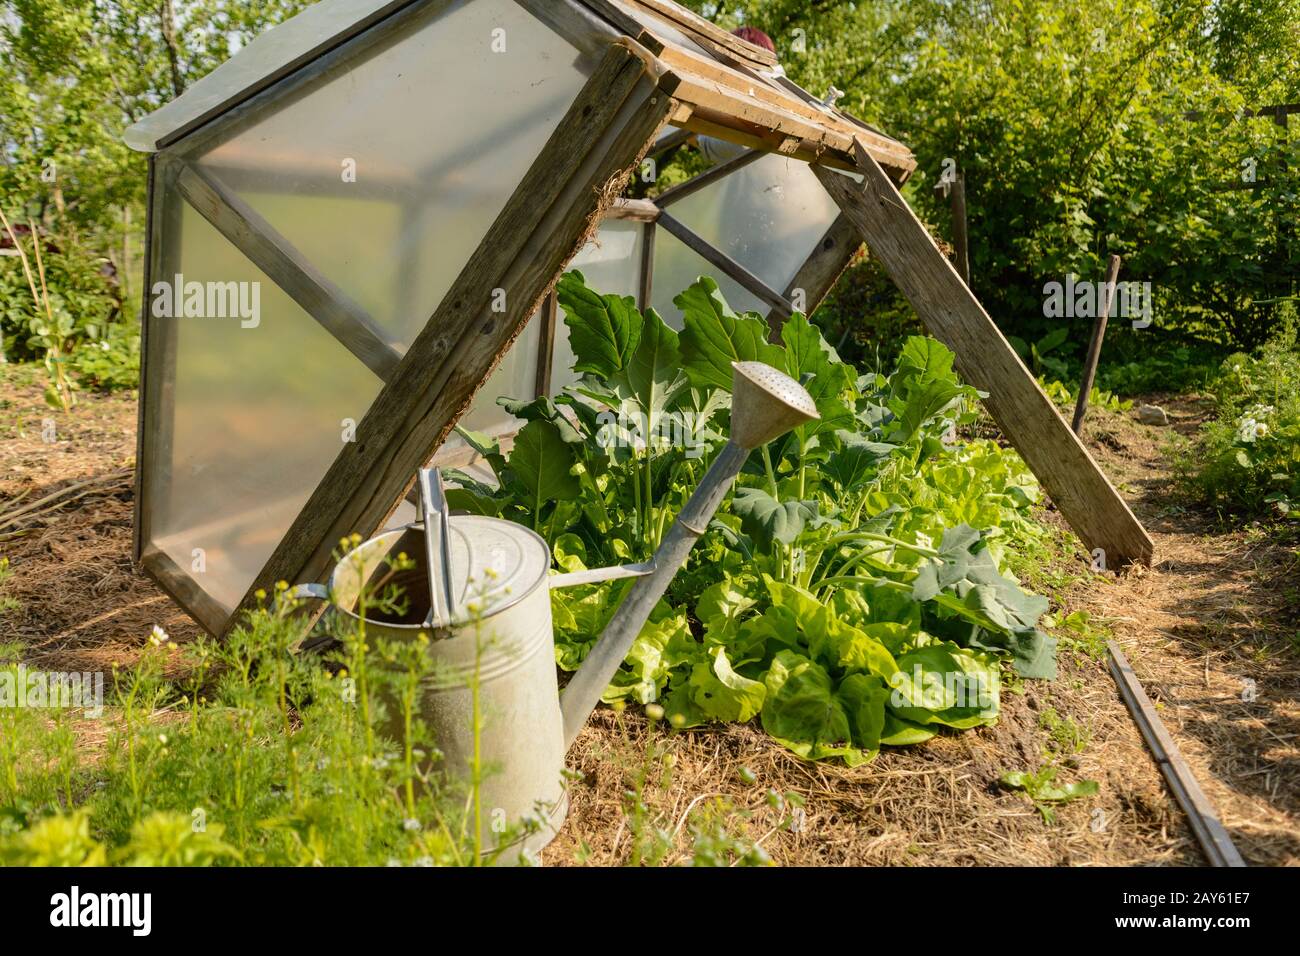 Vegetable garden with green salad in handmade cold frame Stock Photo